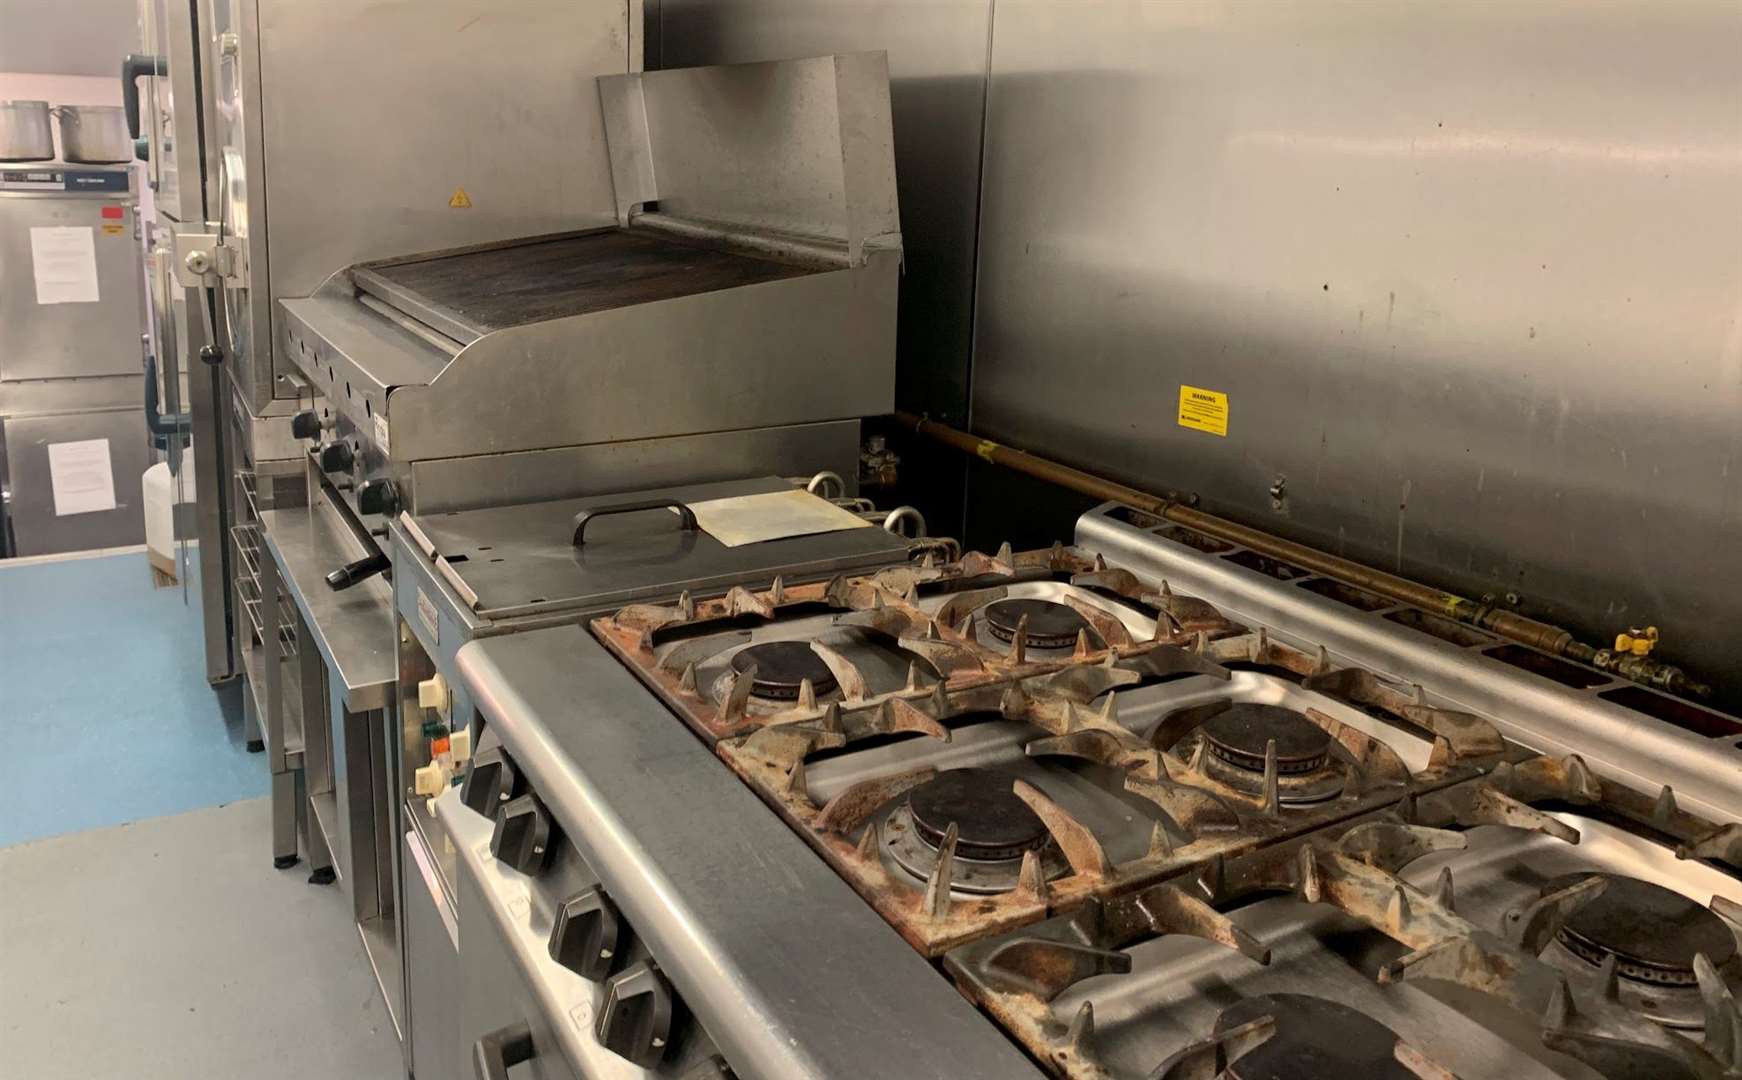 Owner of The Kennington Carvery Jeff Hacker claims the inspection report was “unduly harsh”